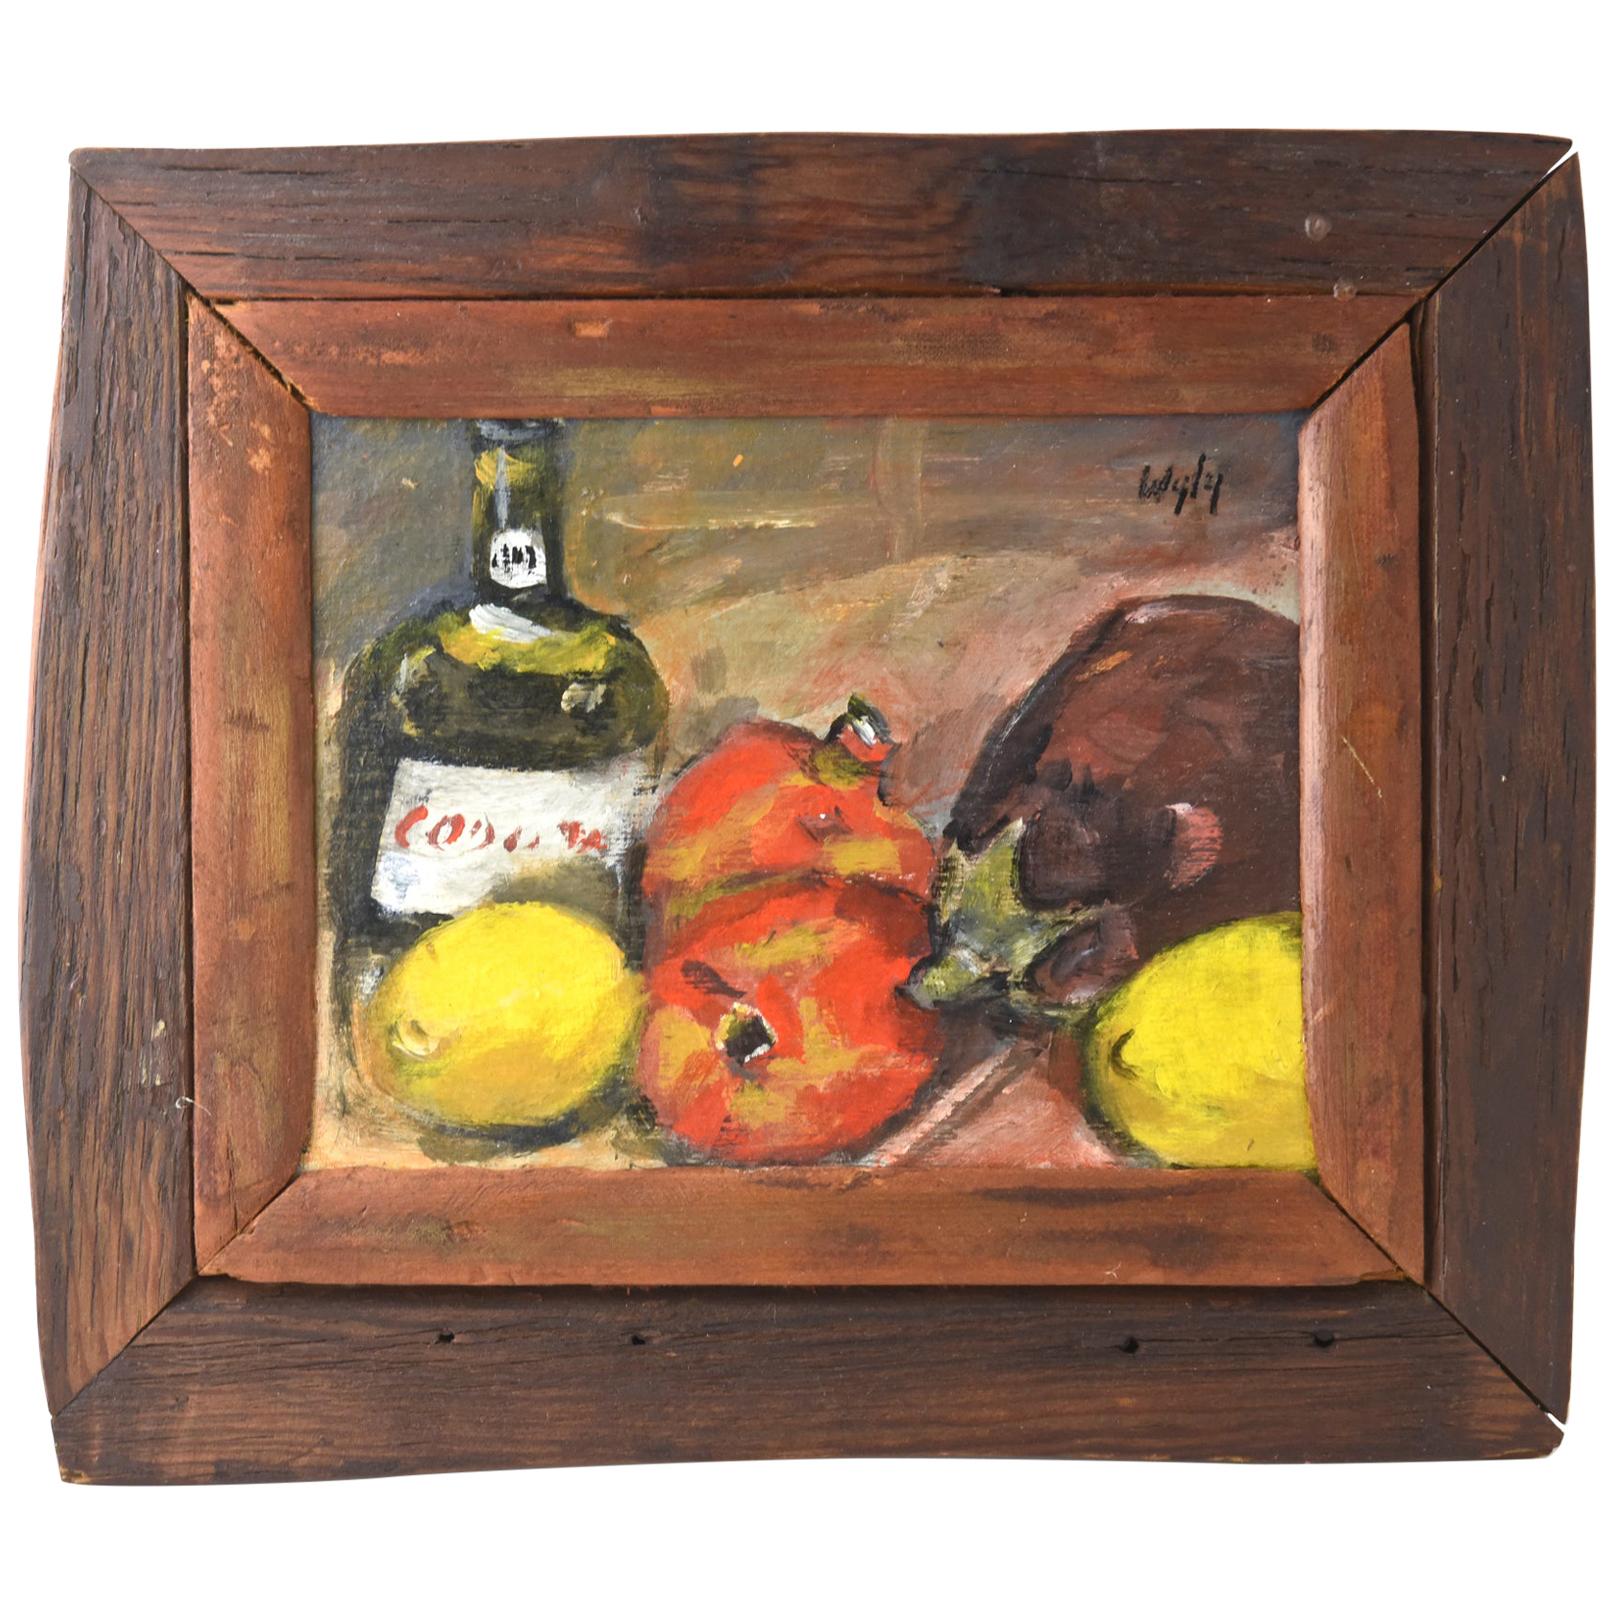 Fruit and Bottle Still Life by Wyly For Sale